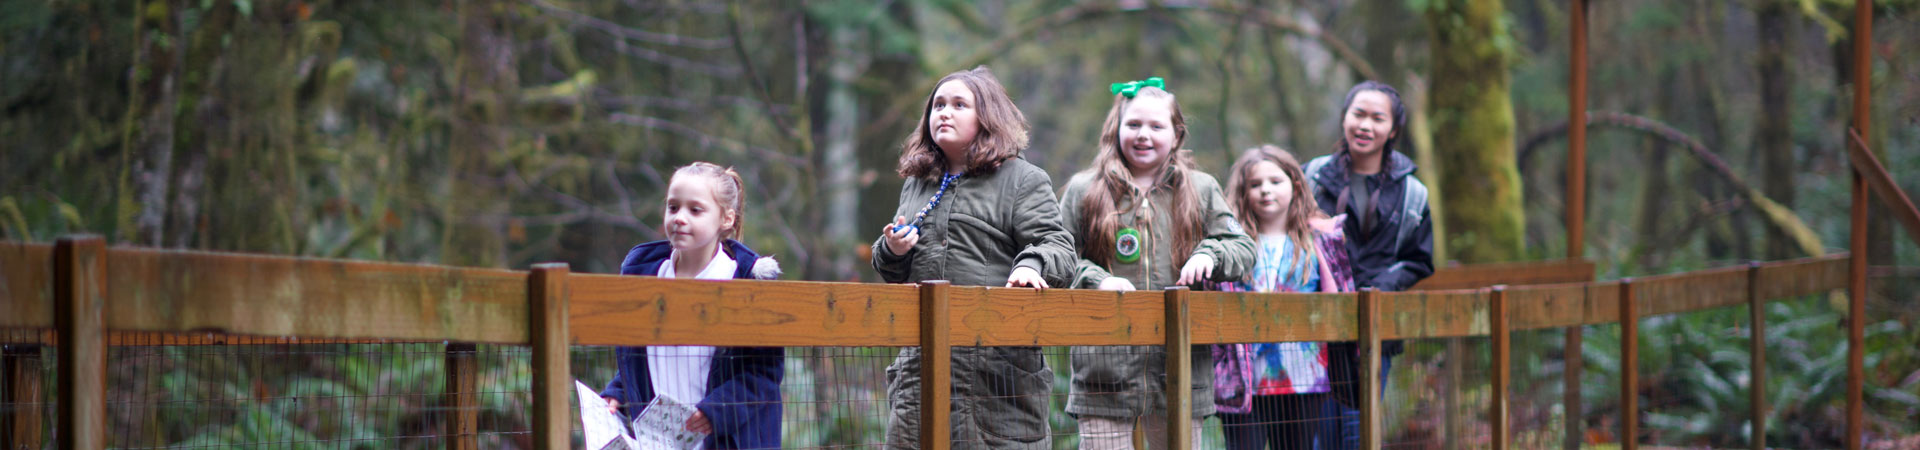  A group of five Girl Scouts crossing a bridge in the woods. 